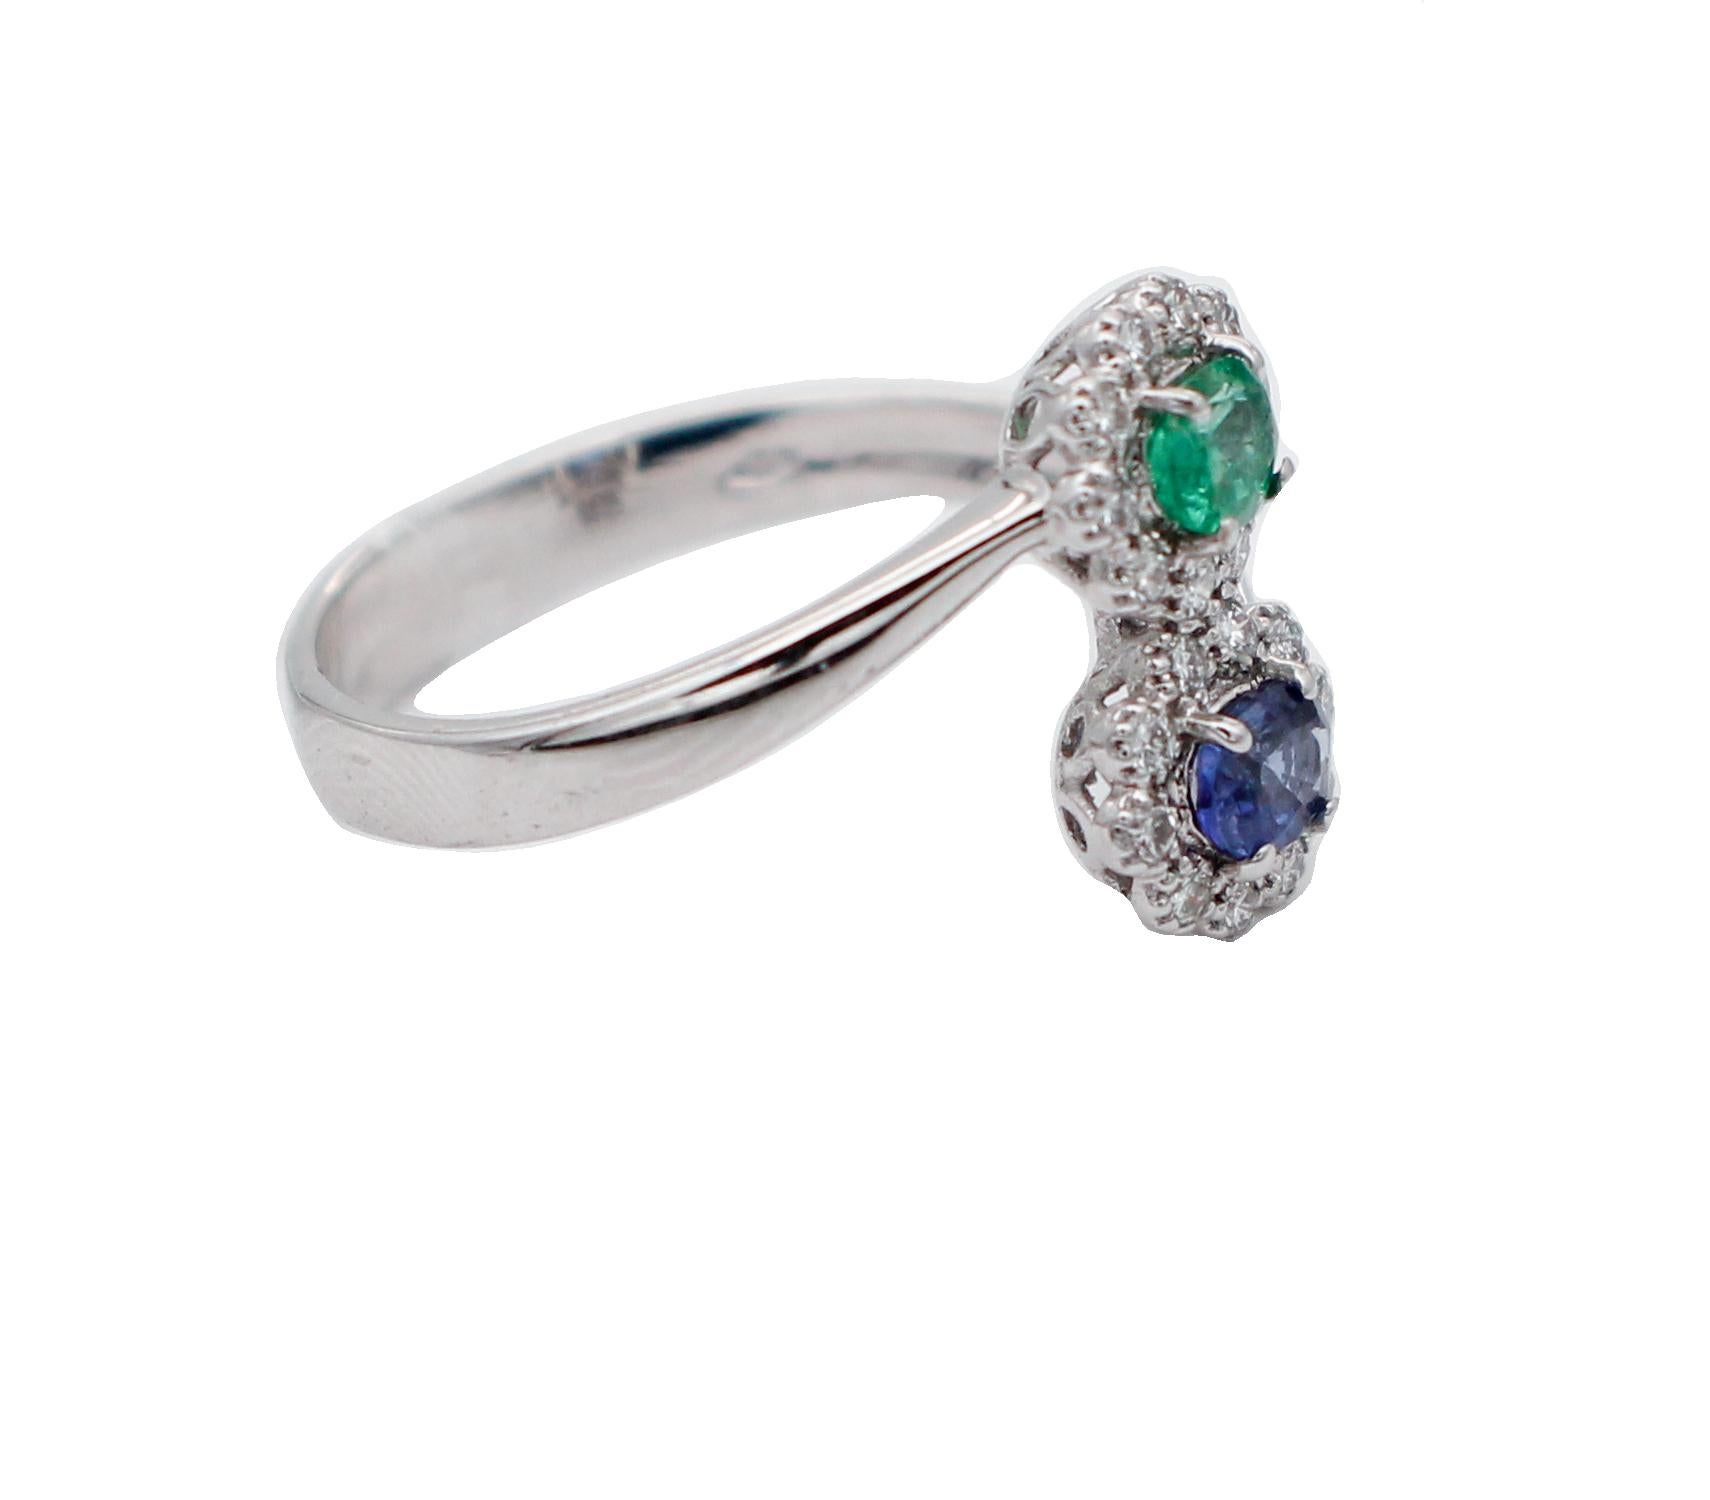 SHIPPING POLICY:
No additional costs will be added to this order.
Shipping costs will be totally covered by the seller (customs duties included).

Beautiful modern ring in 18 kt white gold structure mounted with an oval emerald and an oval